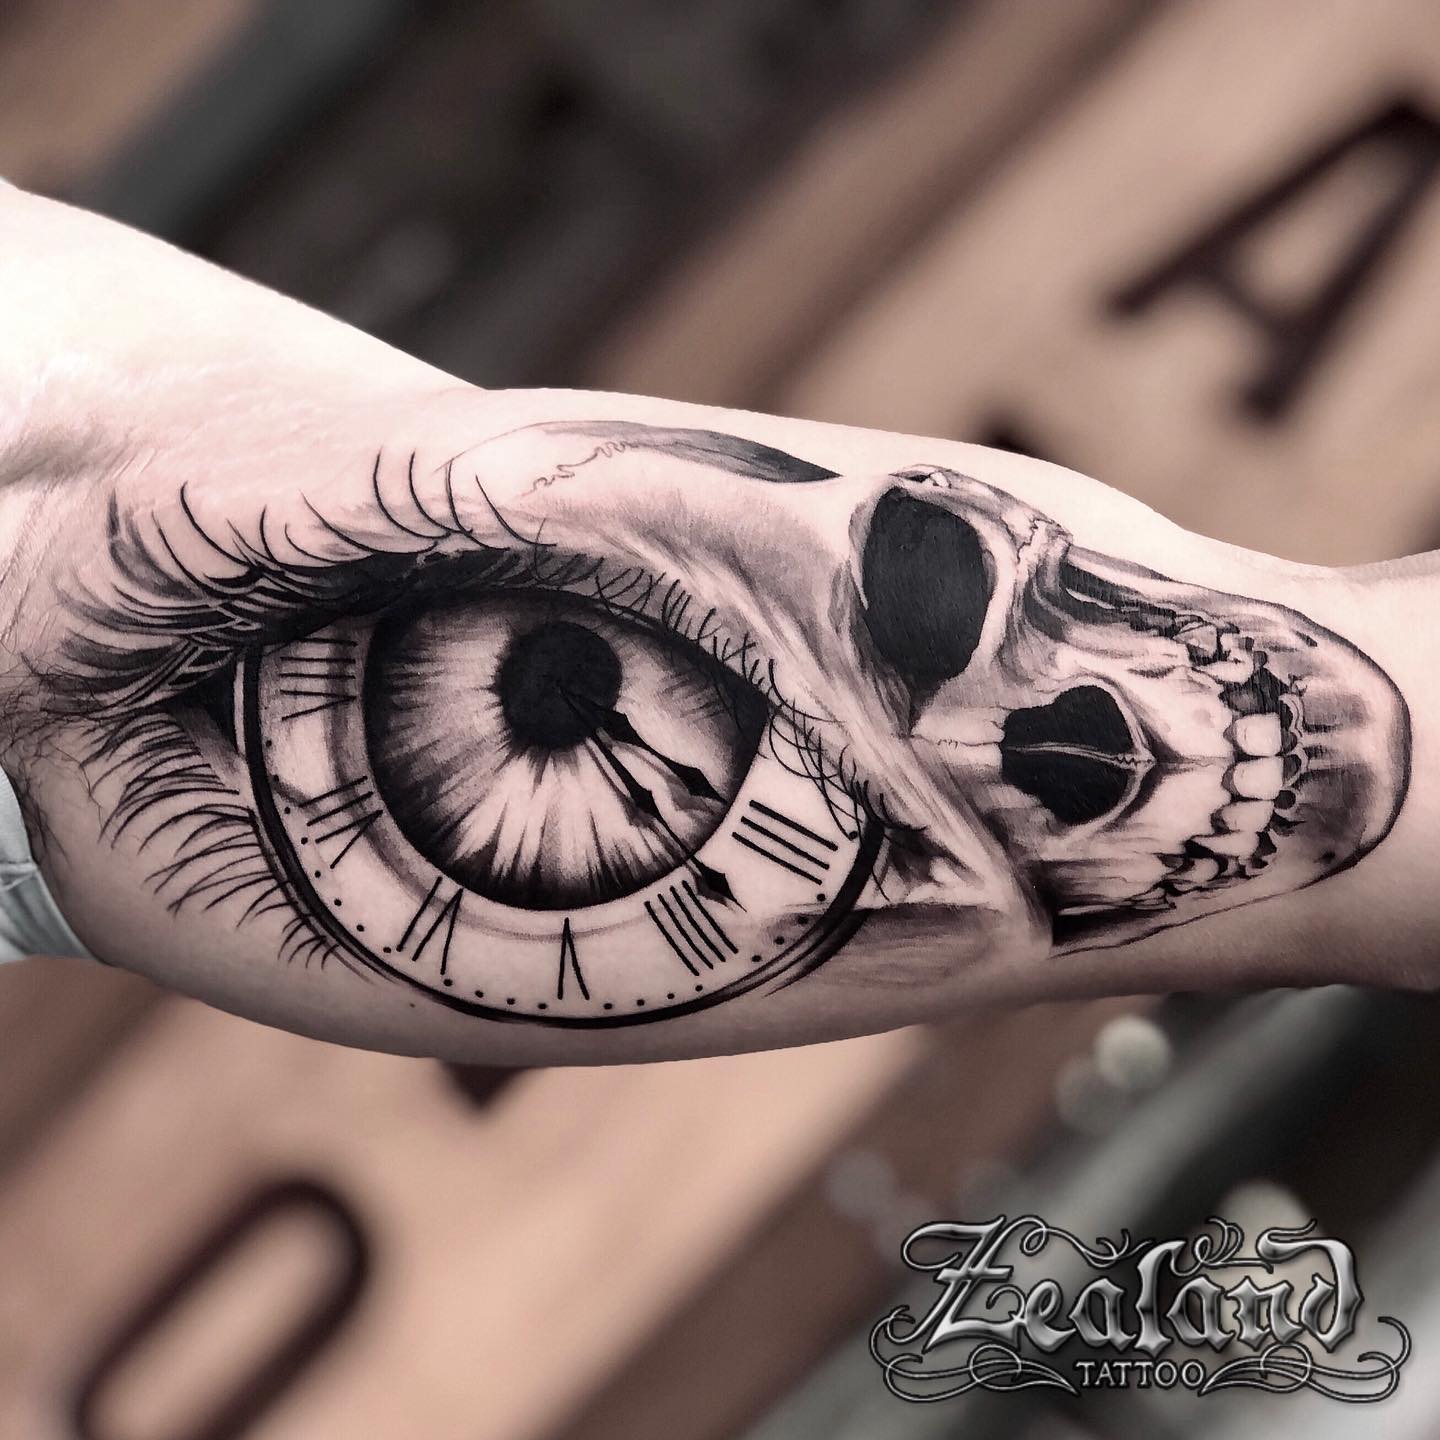 Diligent Ink Tattoo Studio - Done this dinosaur eye and clock tattoo today.  #dragon dragoneye #eyetattoo #dinosaur #dinosaureye #jurassicpark  #jurassicworld #clock #pocketwatch #armtattoo #sleeve #tattoo #ink #bicep  #blackandgreywithcolor #underarm ...